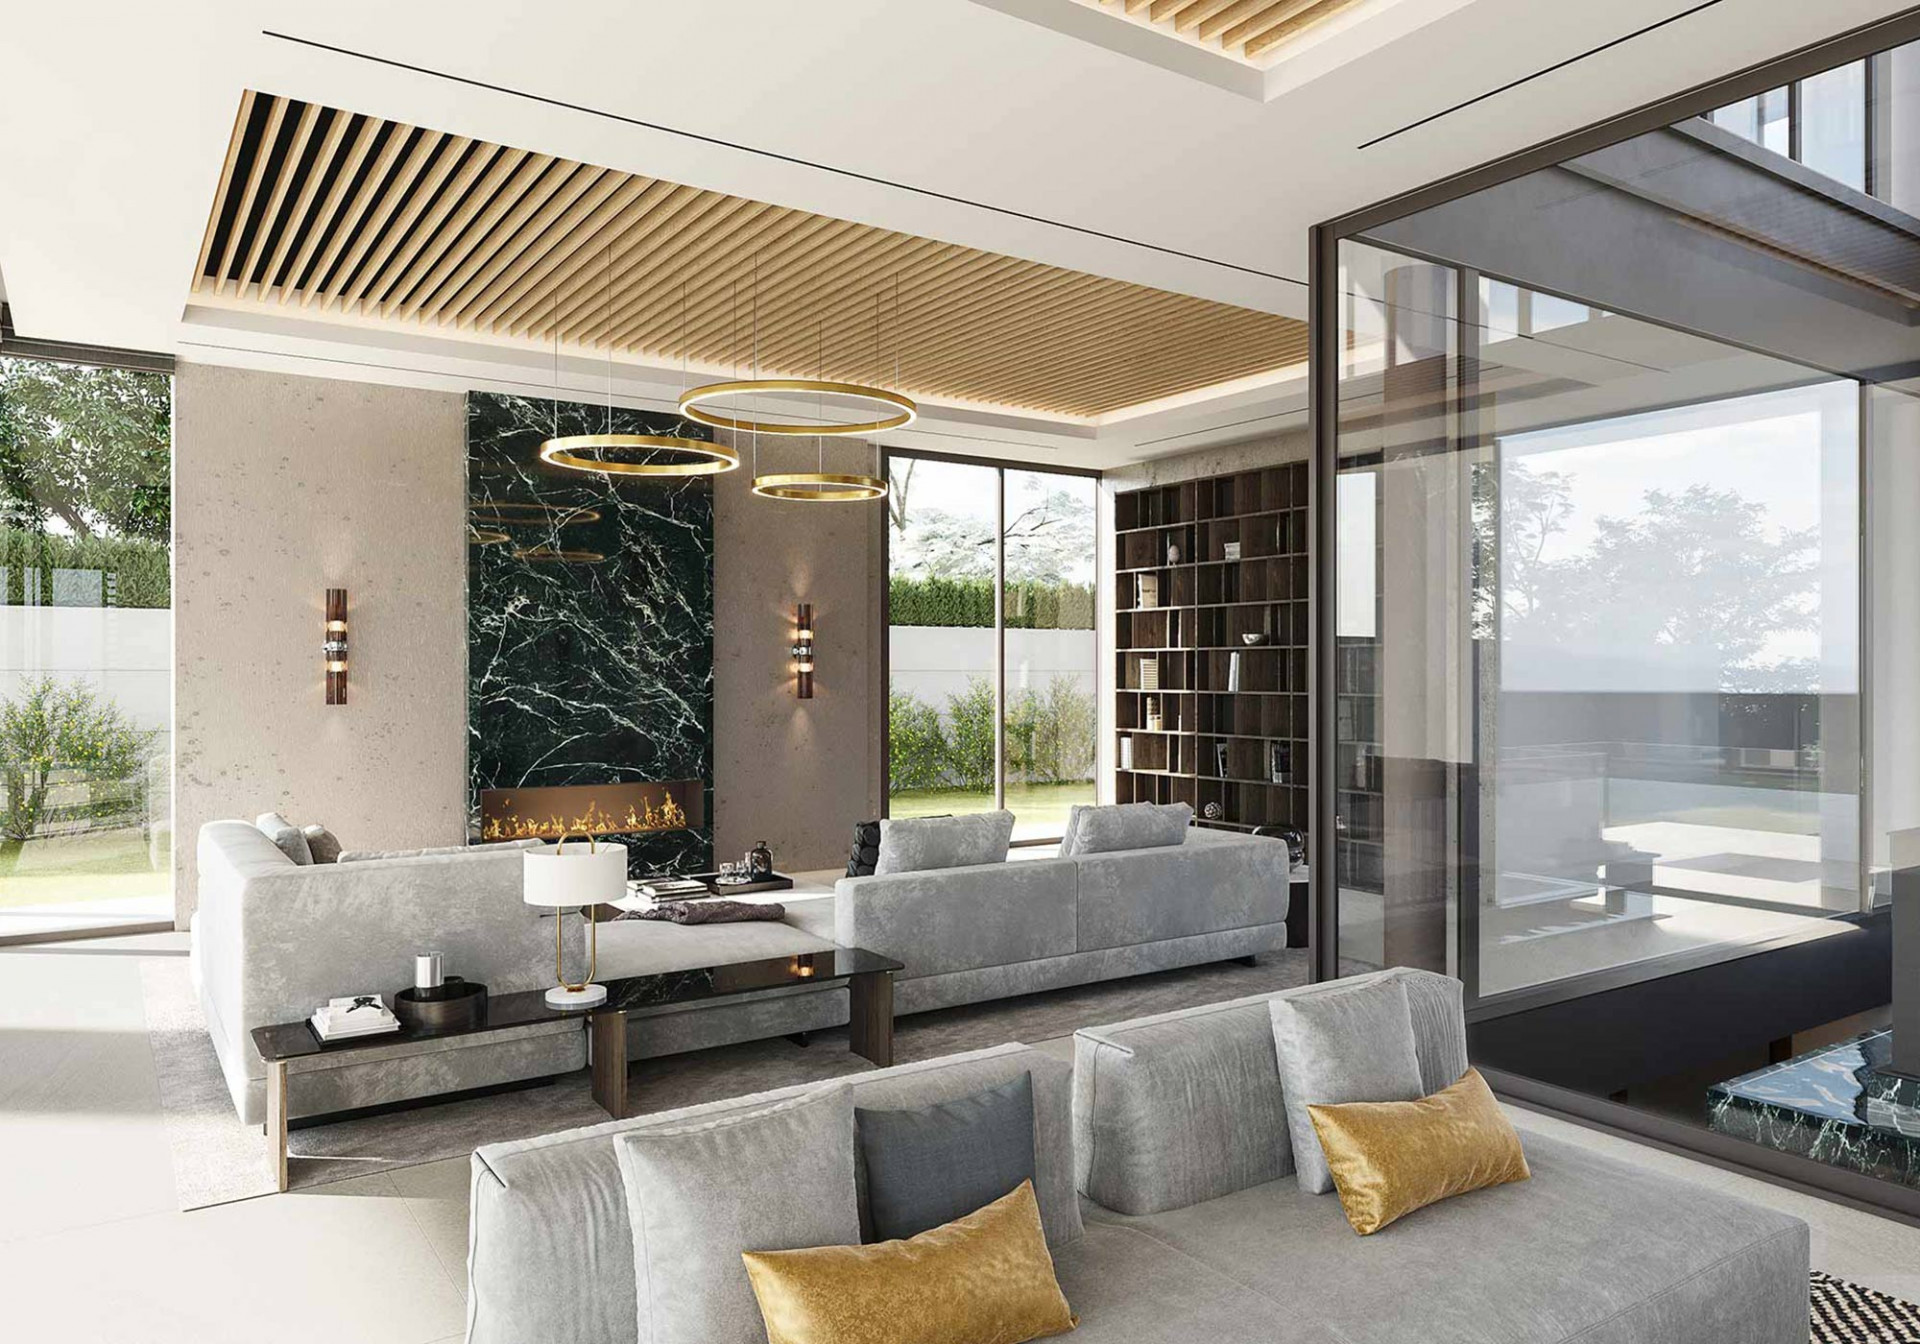 Palacetes de Banús: New luxury residential complex with panoramic views of the Mediterranean Sea, Puerto Banus and the mountains. | Image 10